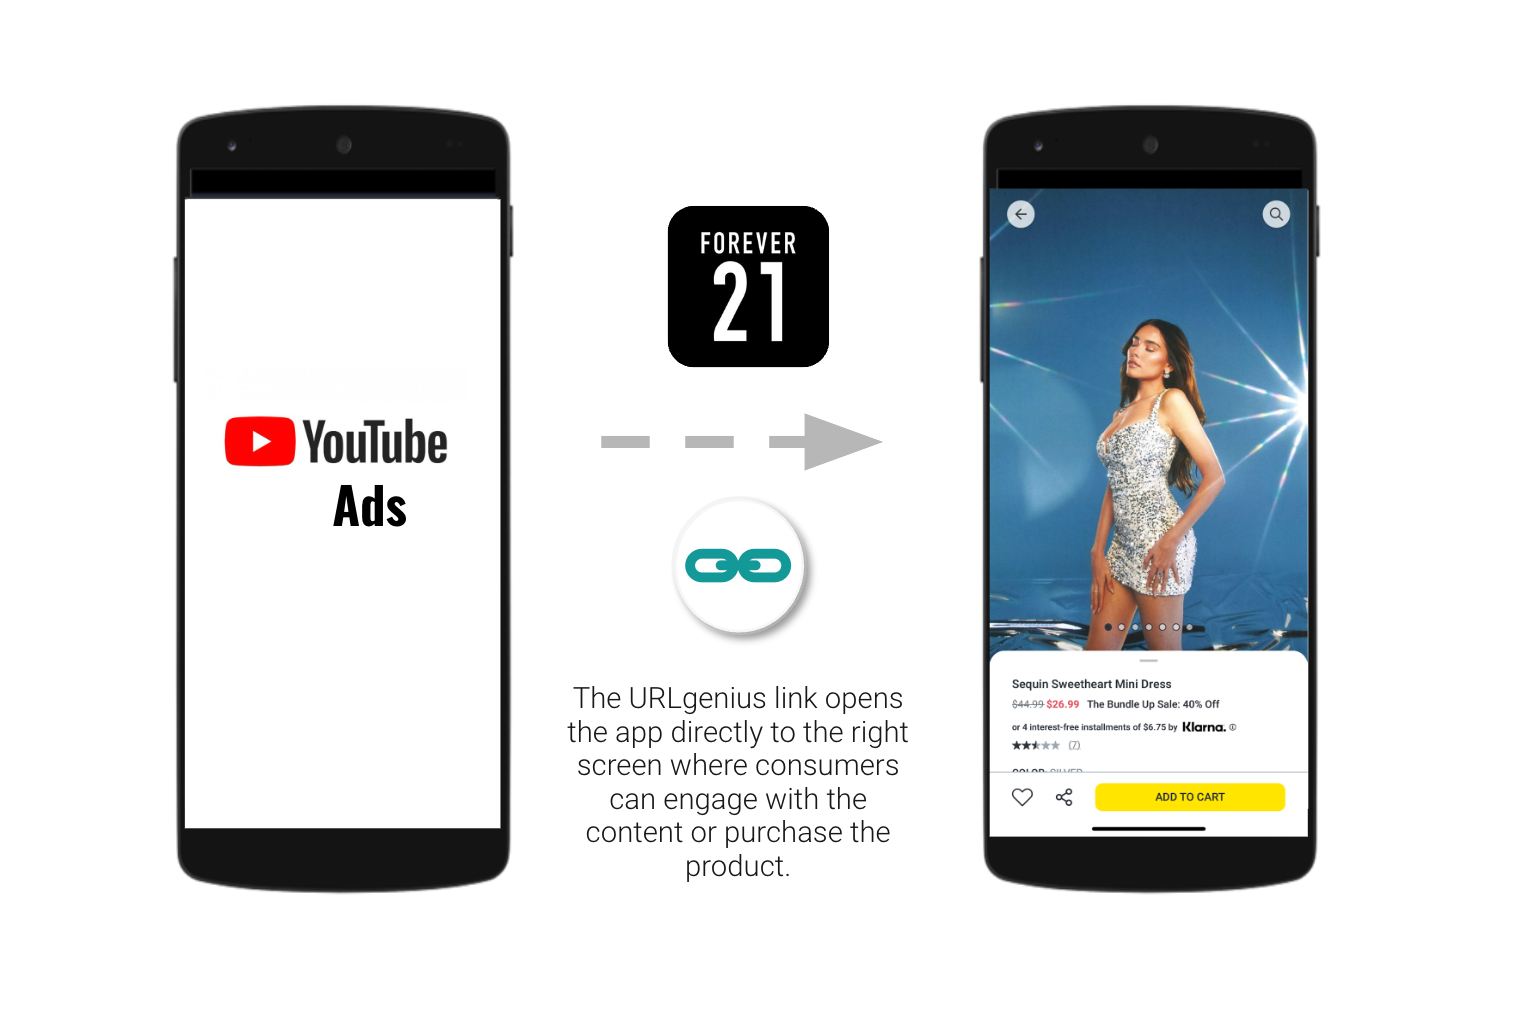 The URLgenius link opens the app directly to the right screen where consumers can engage with the content or purchase the product